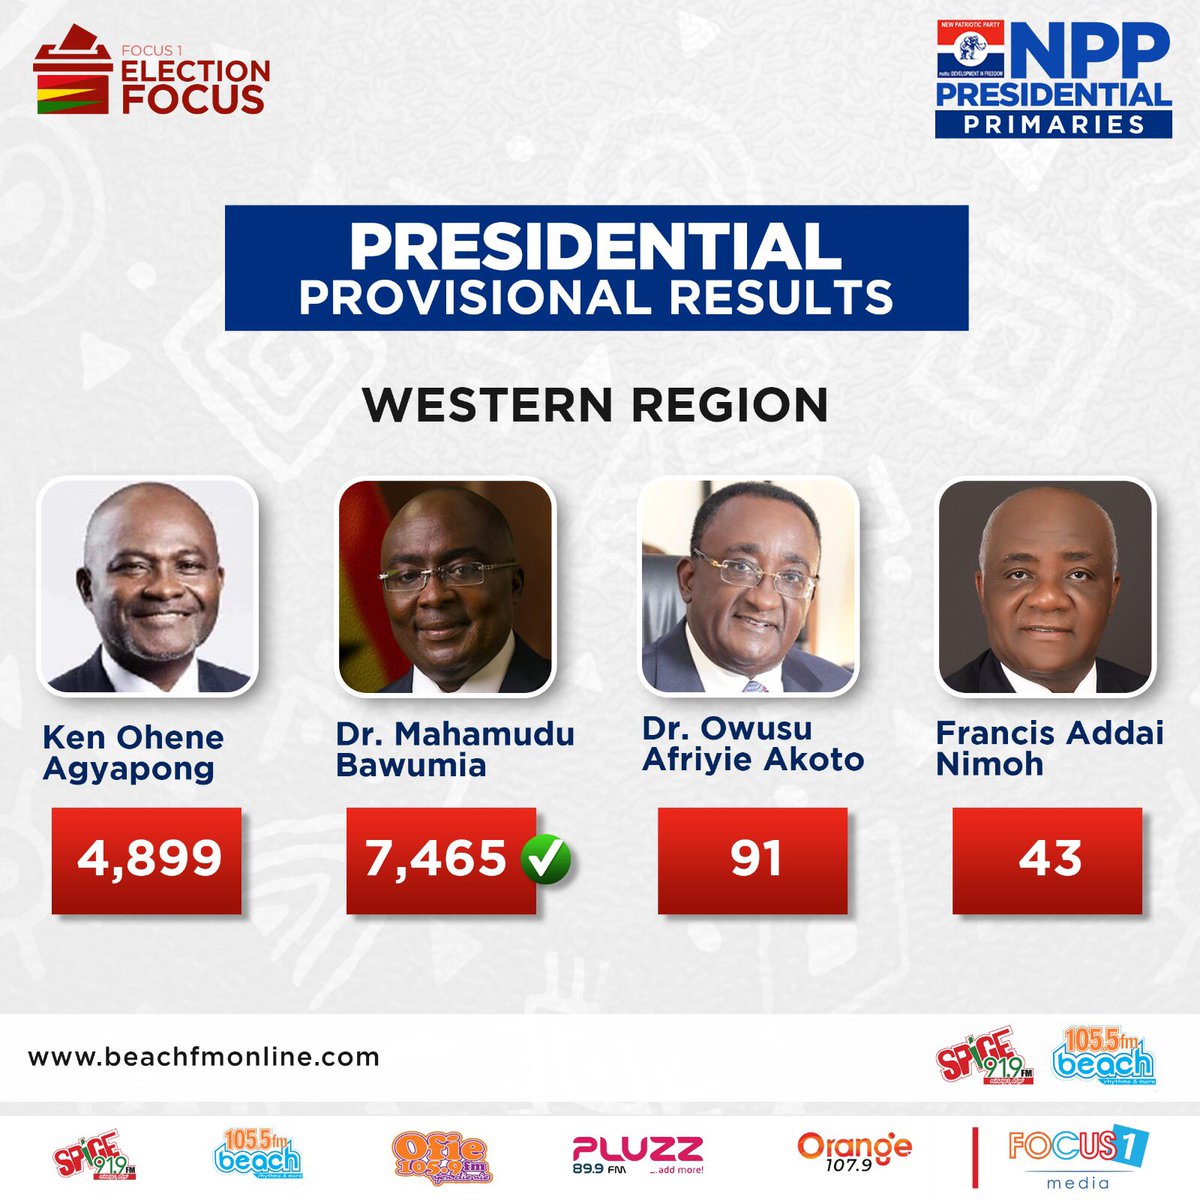 This is how Western Region voted.
#ElectionFocus
#NPPDecides